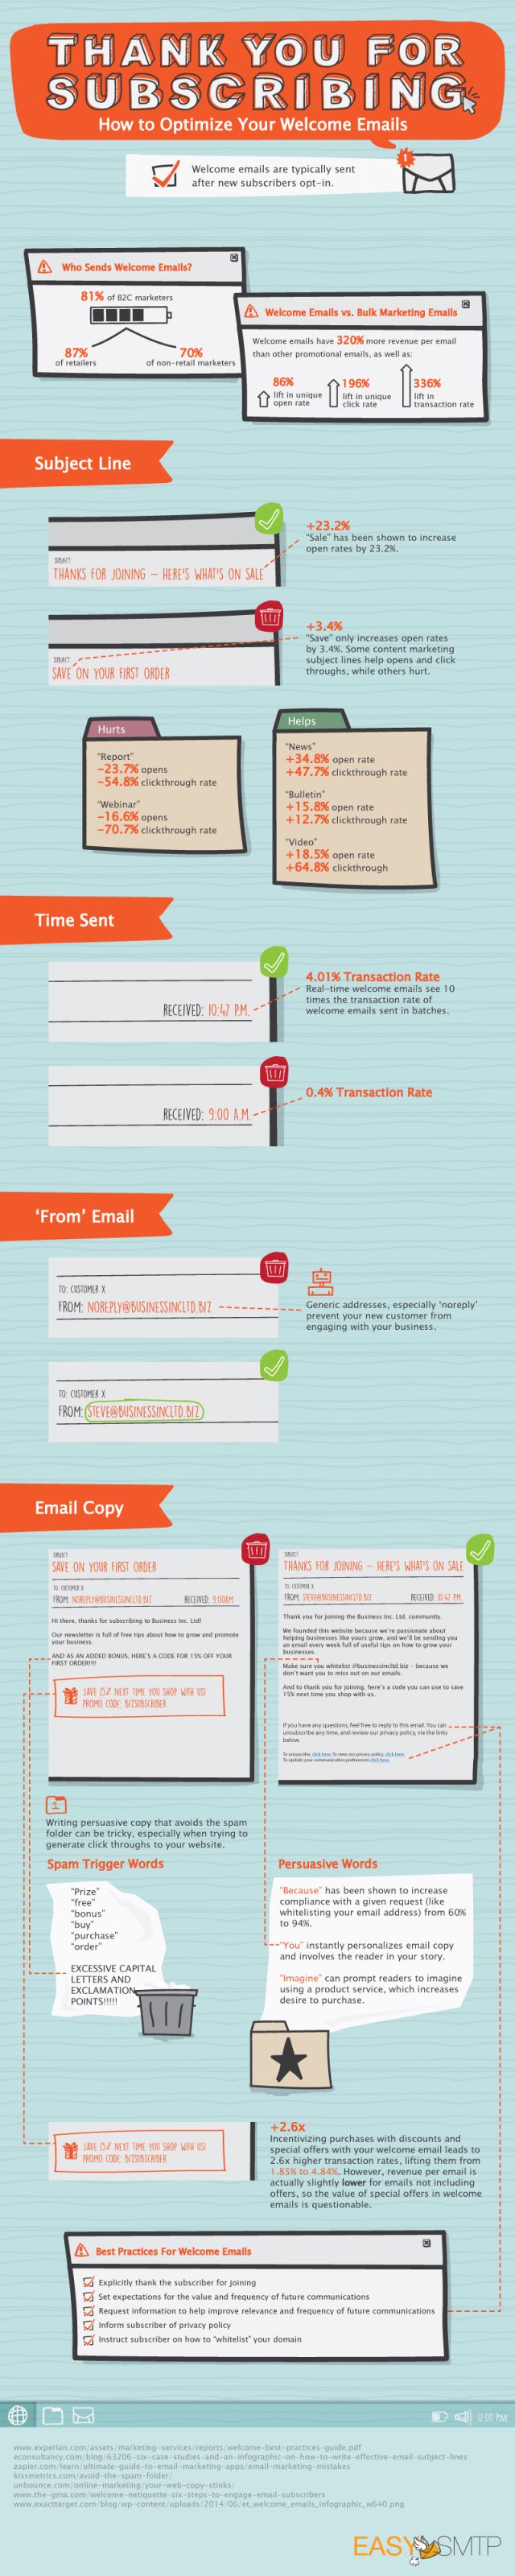 Ways to optimise your welcome emails